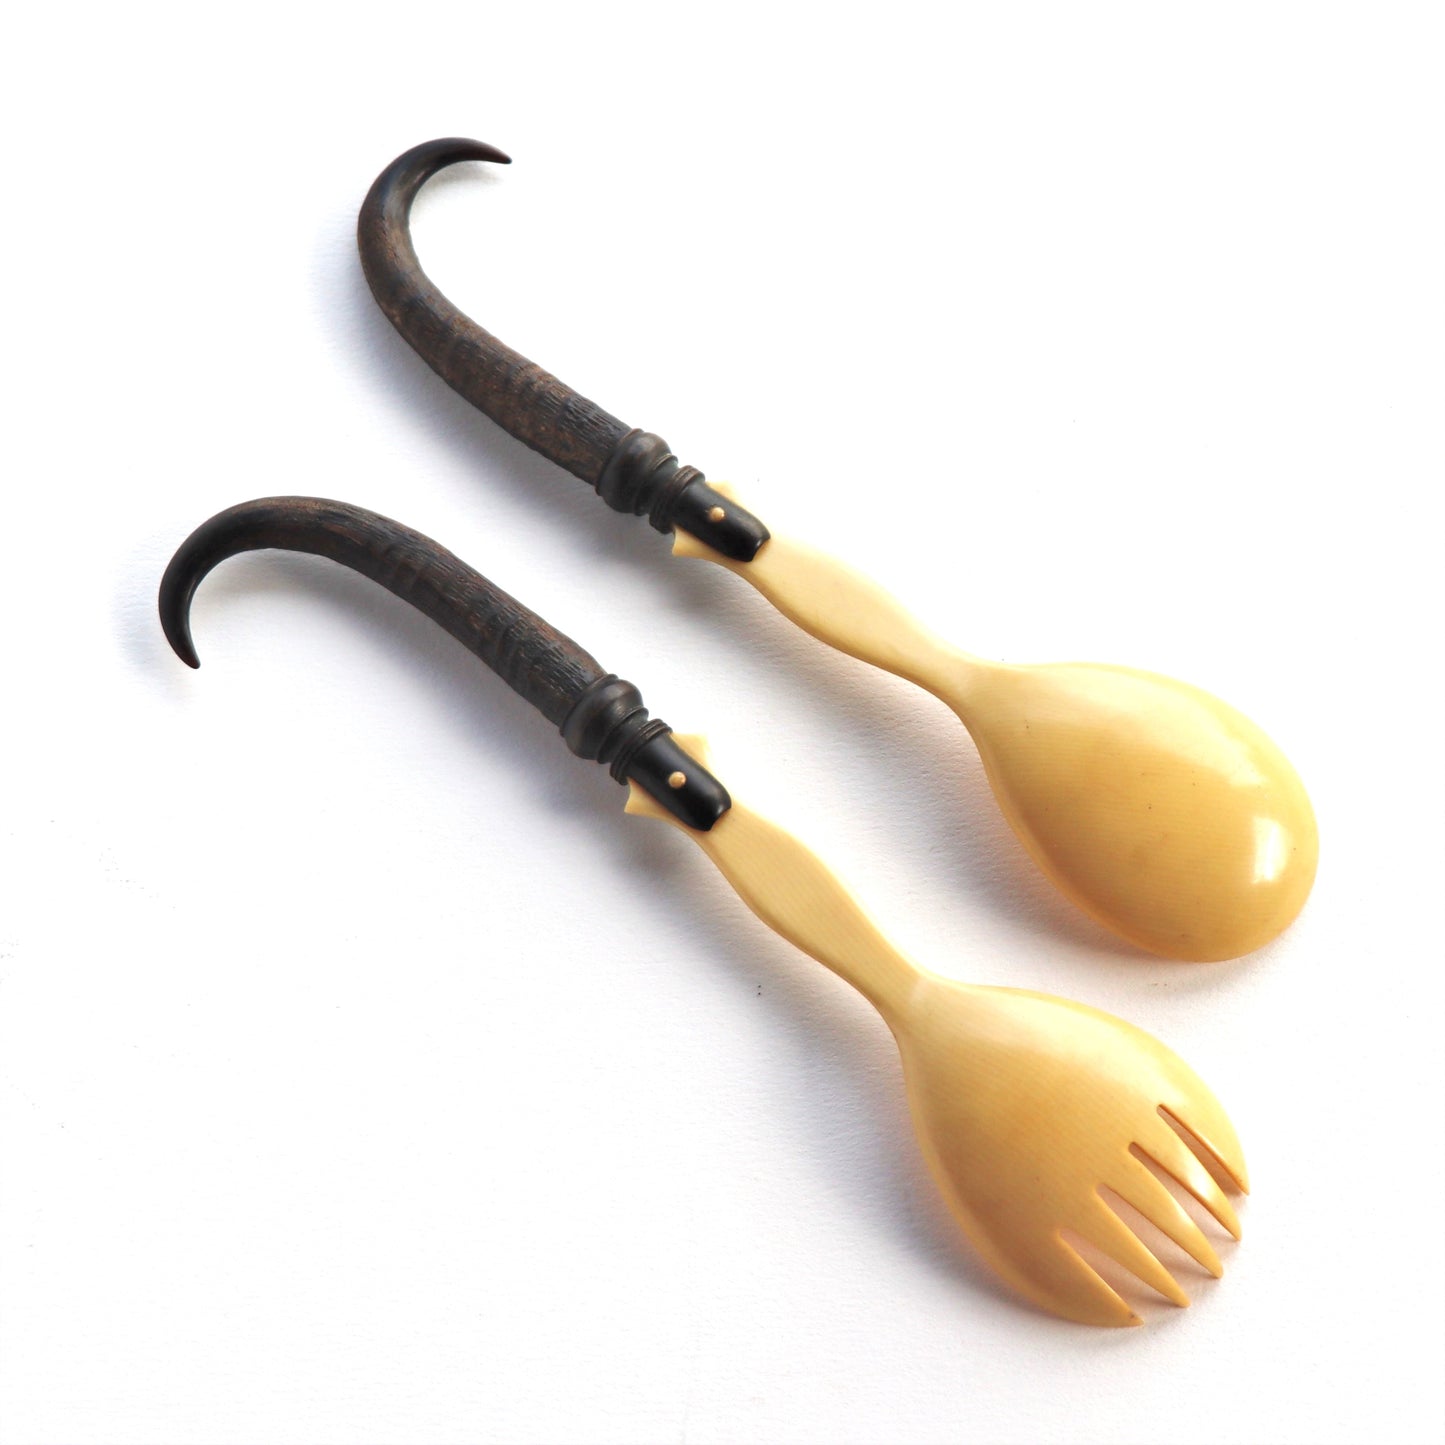 Vintage Art Deco Horn and Celluloid Small Salad Servers c1930